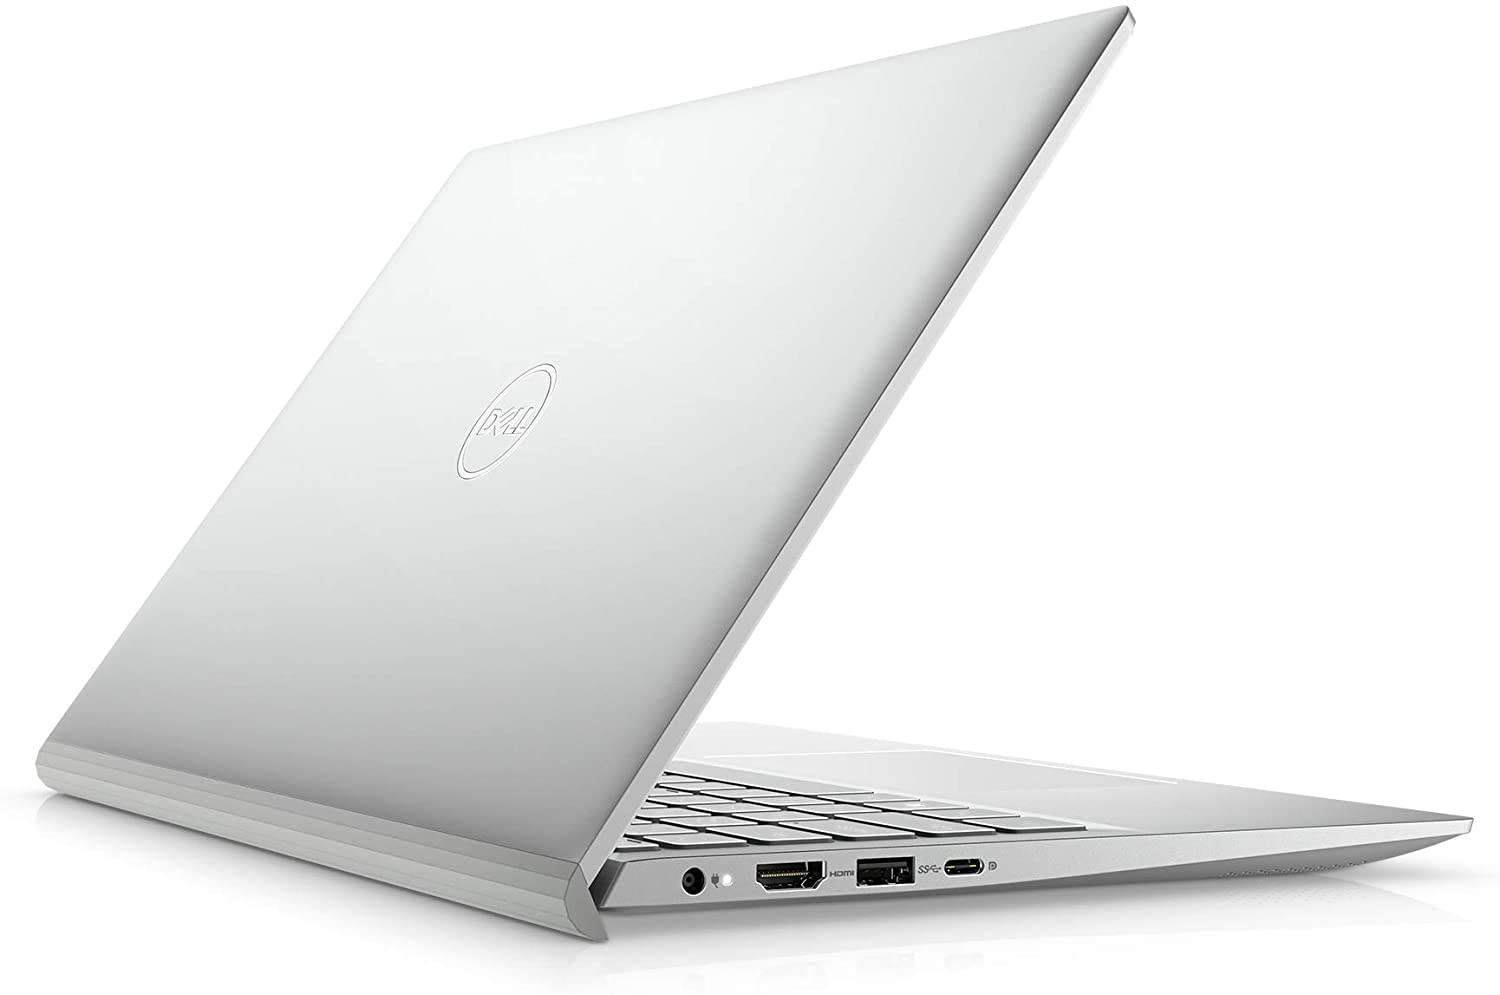 Dell Inspiron 13 5301 - Specs, Tests, and Prices | LaptopMedia.com